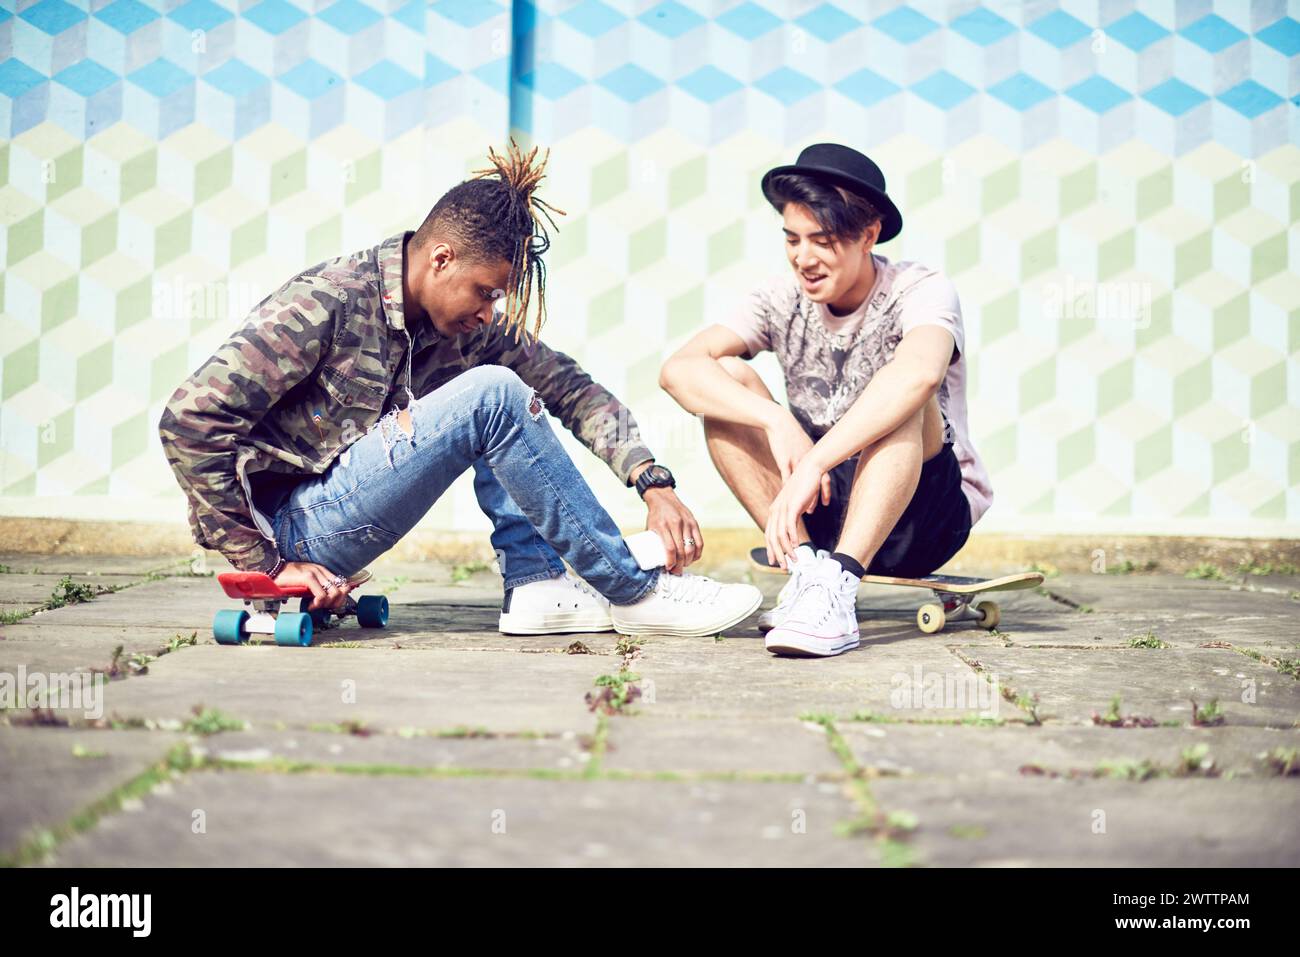 Two individuals sitting and interacting with skateboards Stock Photo